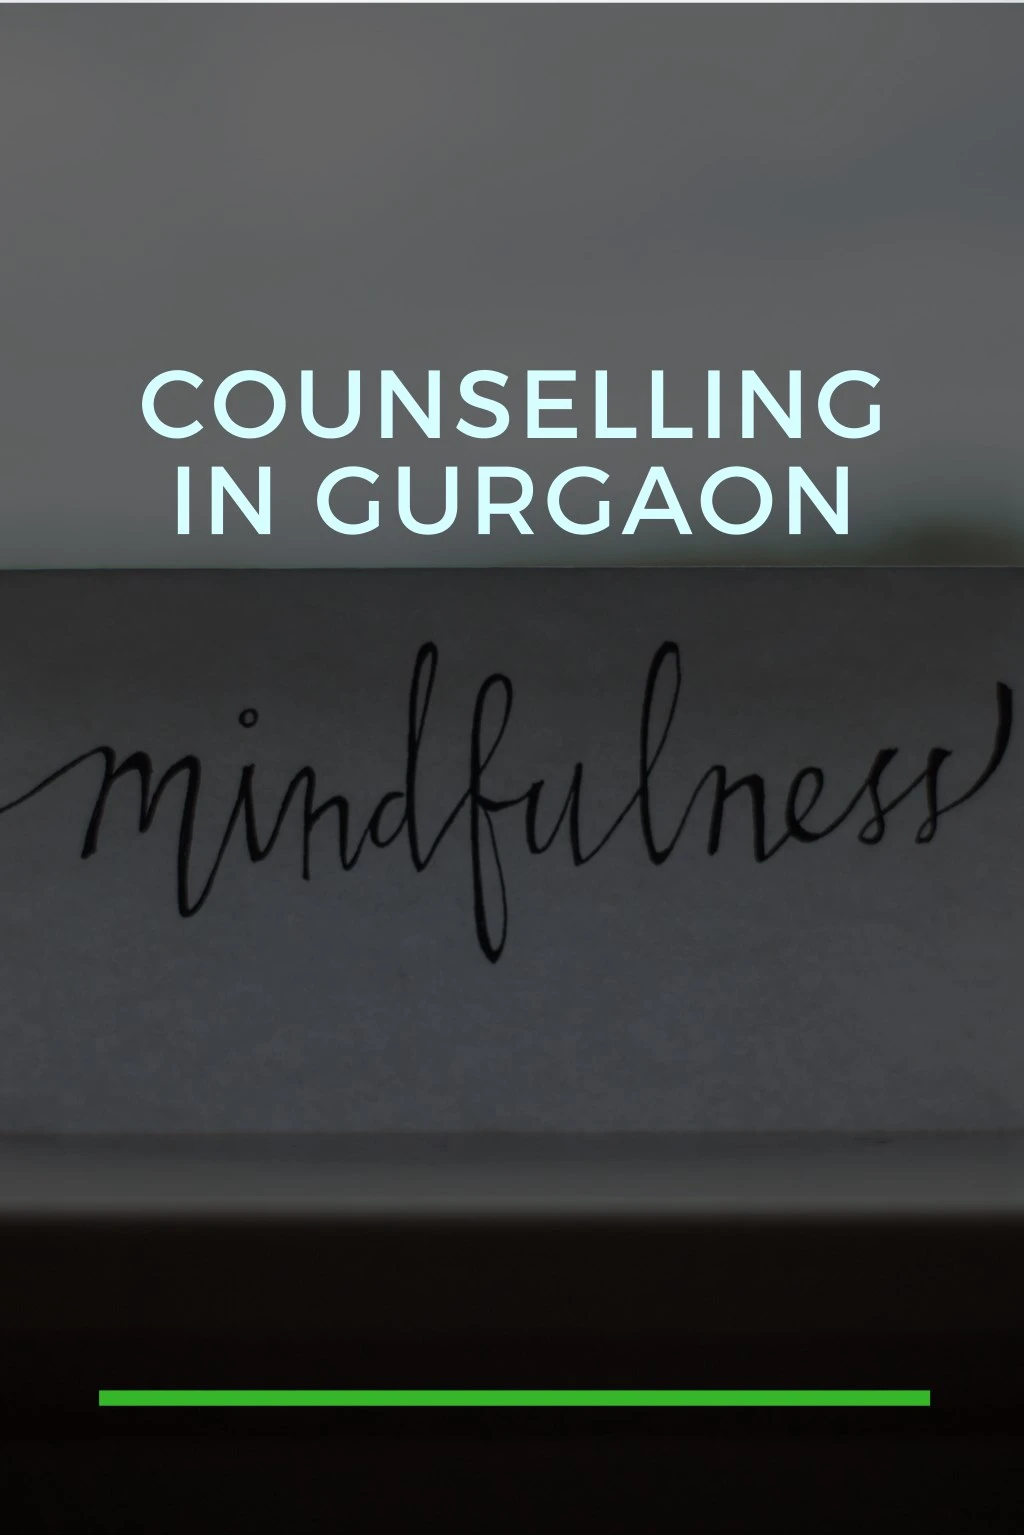 counselling in gurgaon